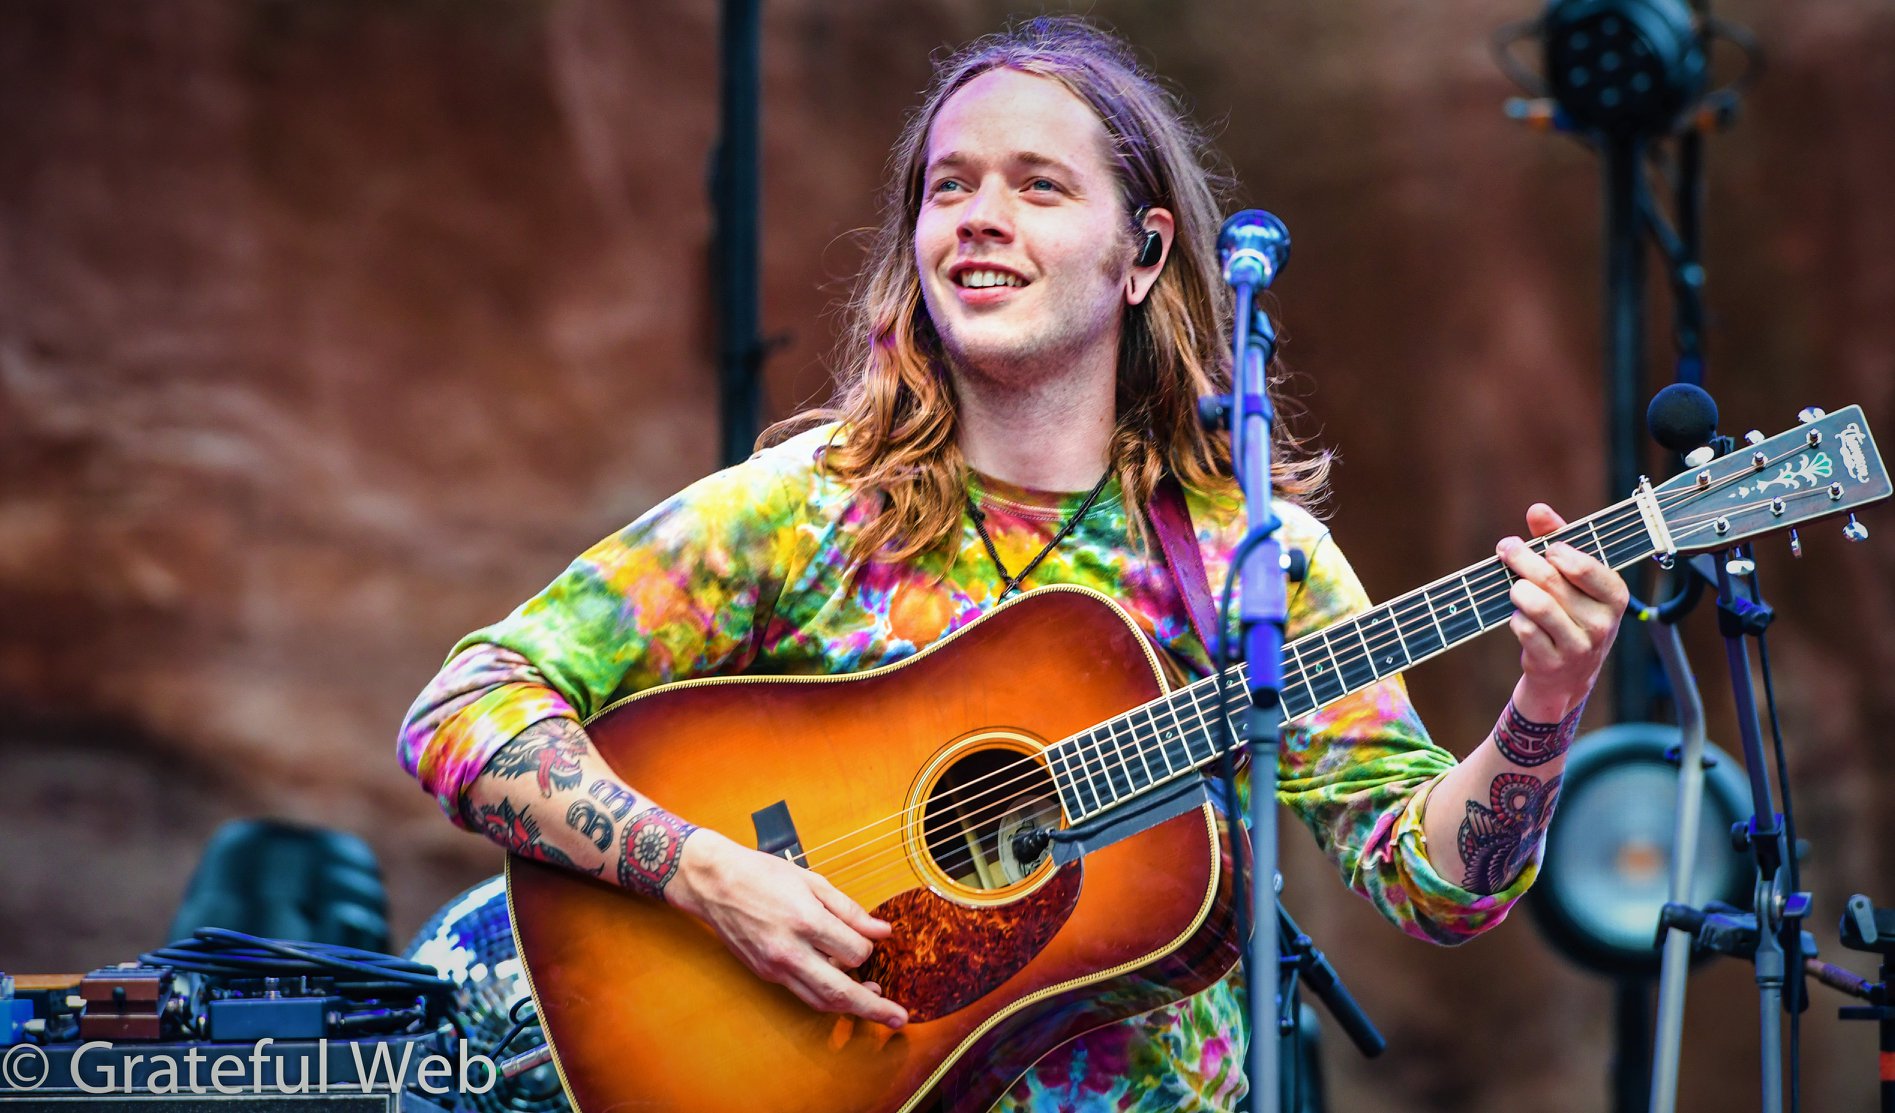 Billy Strings nominated for Best Bluegrass Album and Best American Roots Performance at 64th GRAMMY Awards